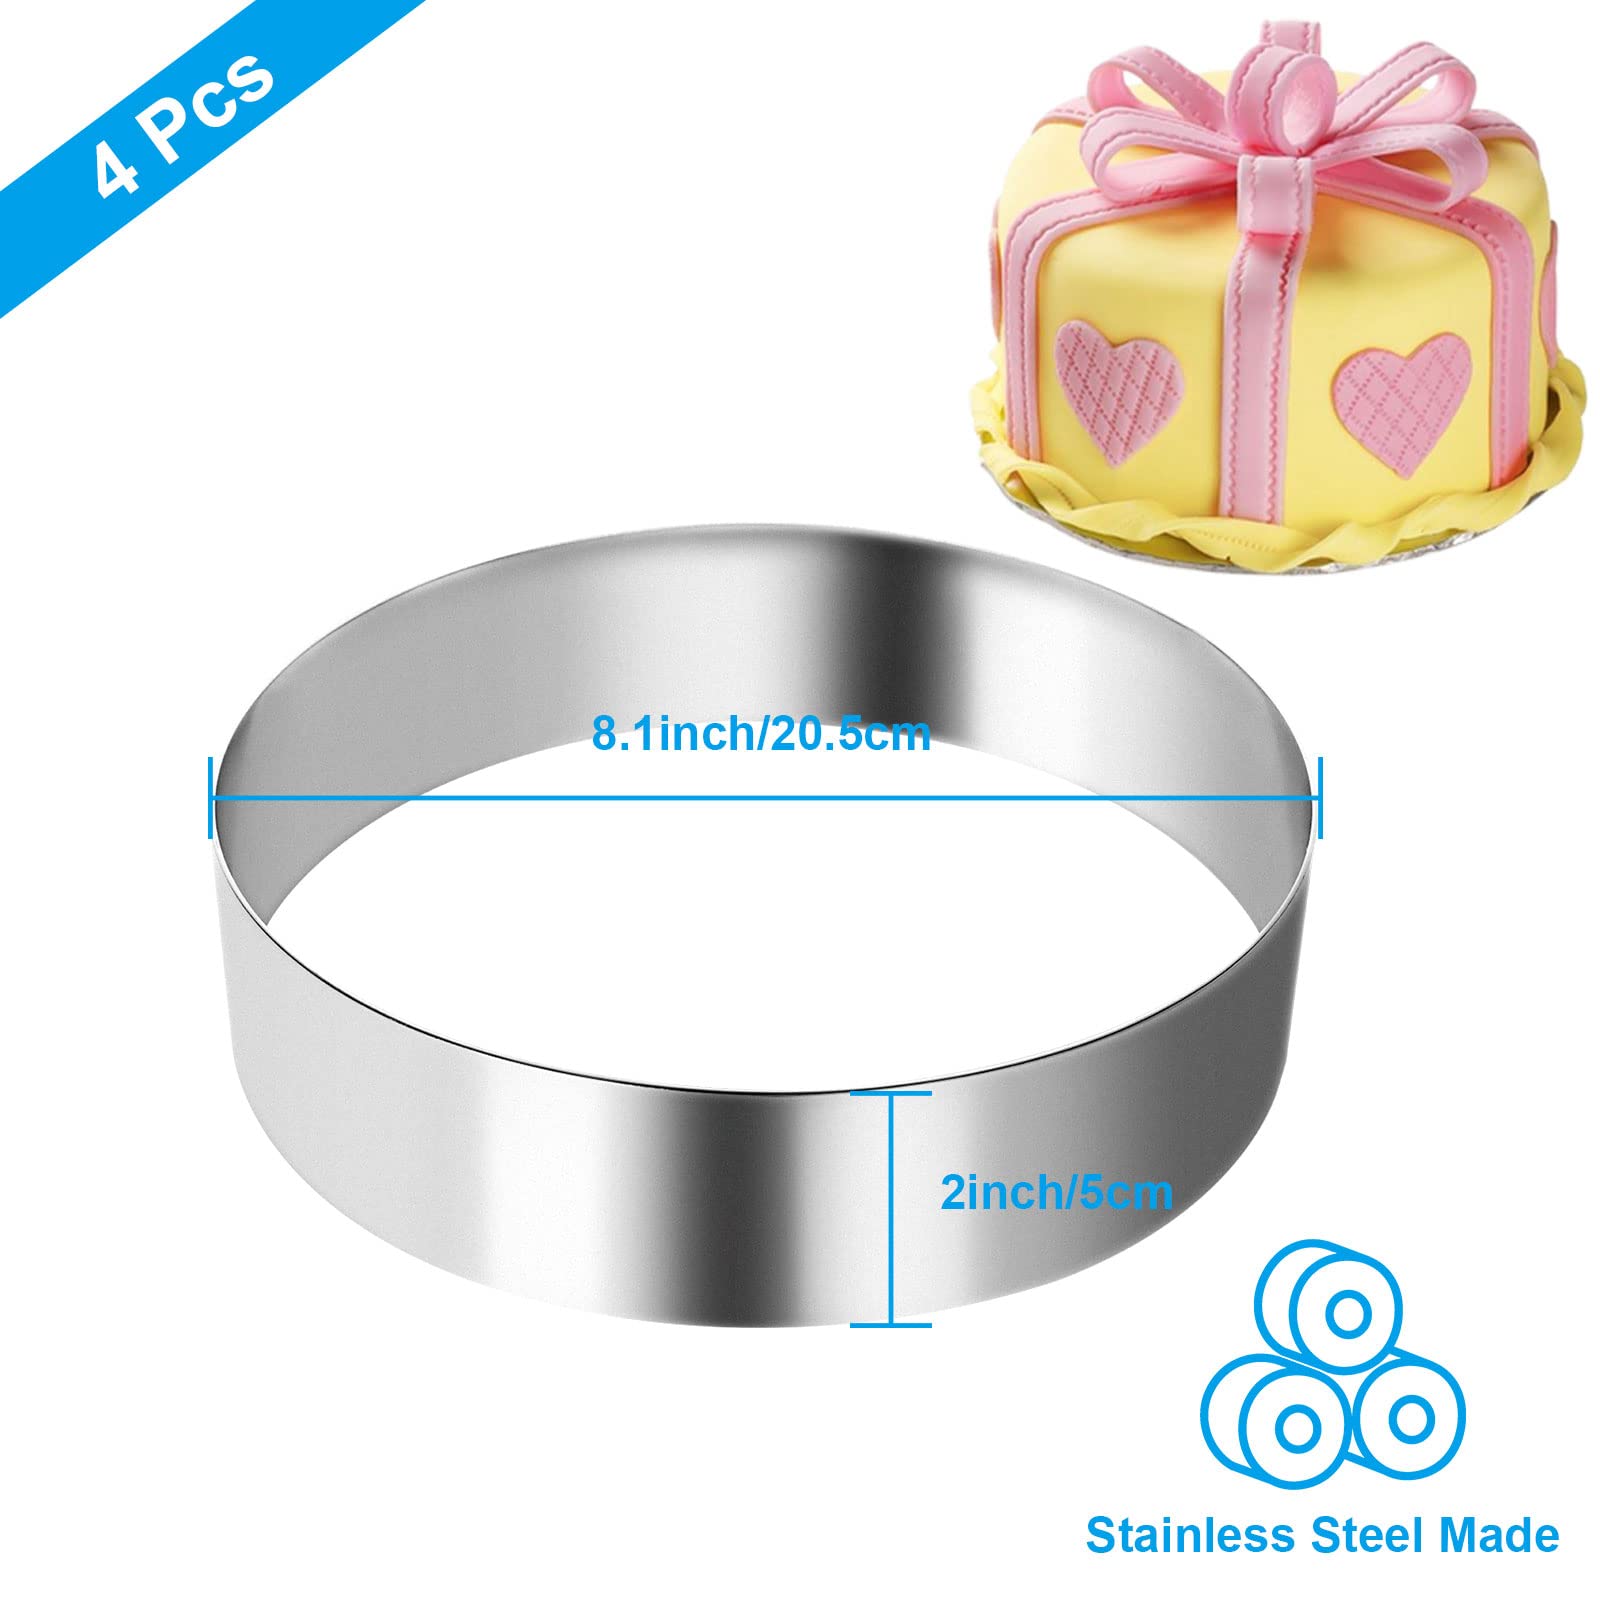 RHBLME 4PCS Cake Ring 8 Inch, Round Cake Rings for Baking, 304 Seamless Stainless Steel Mirror coating Mousse Mould, No Welding Seam Cheese Cake Mousse Ring (2-Inch Height)